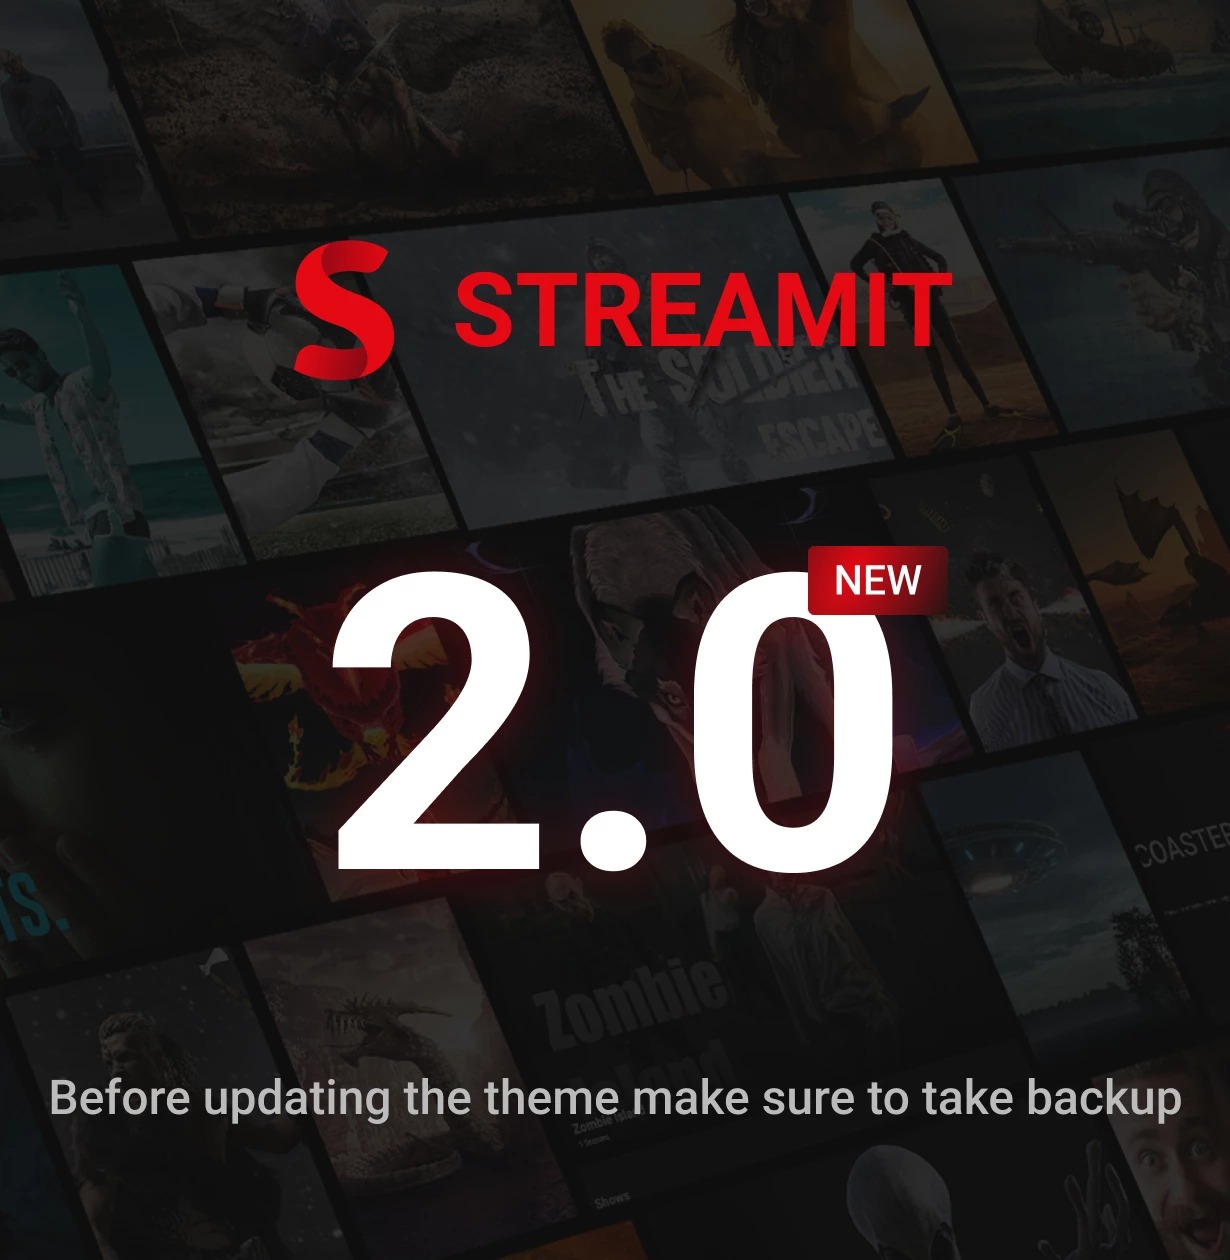 Cover of Exquisite Streamit Theme for Video Streaming.